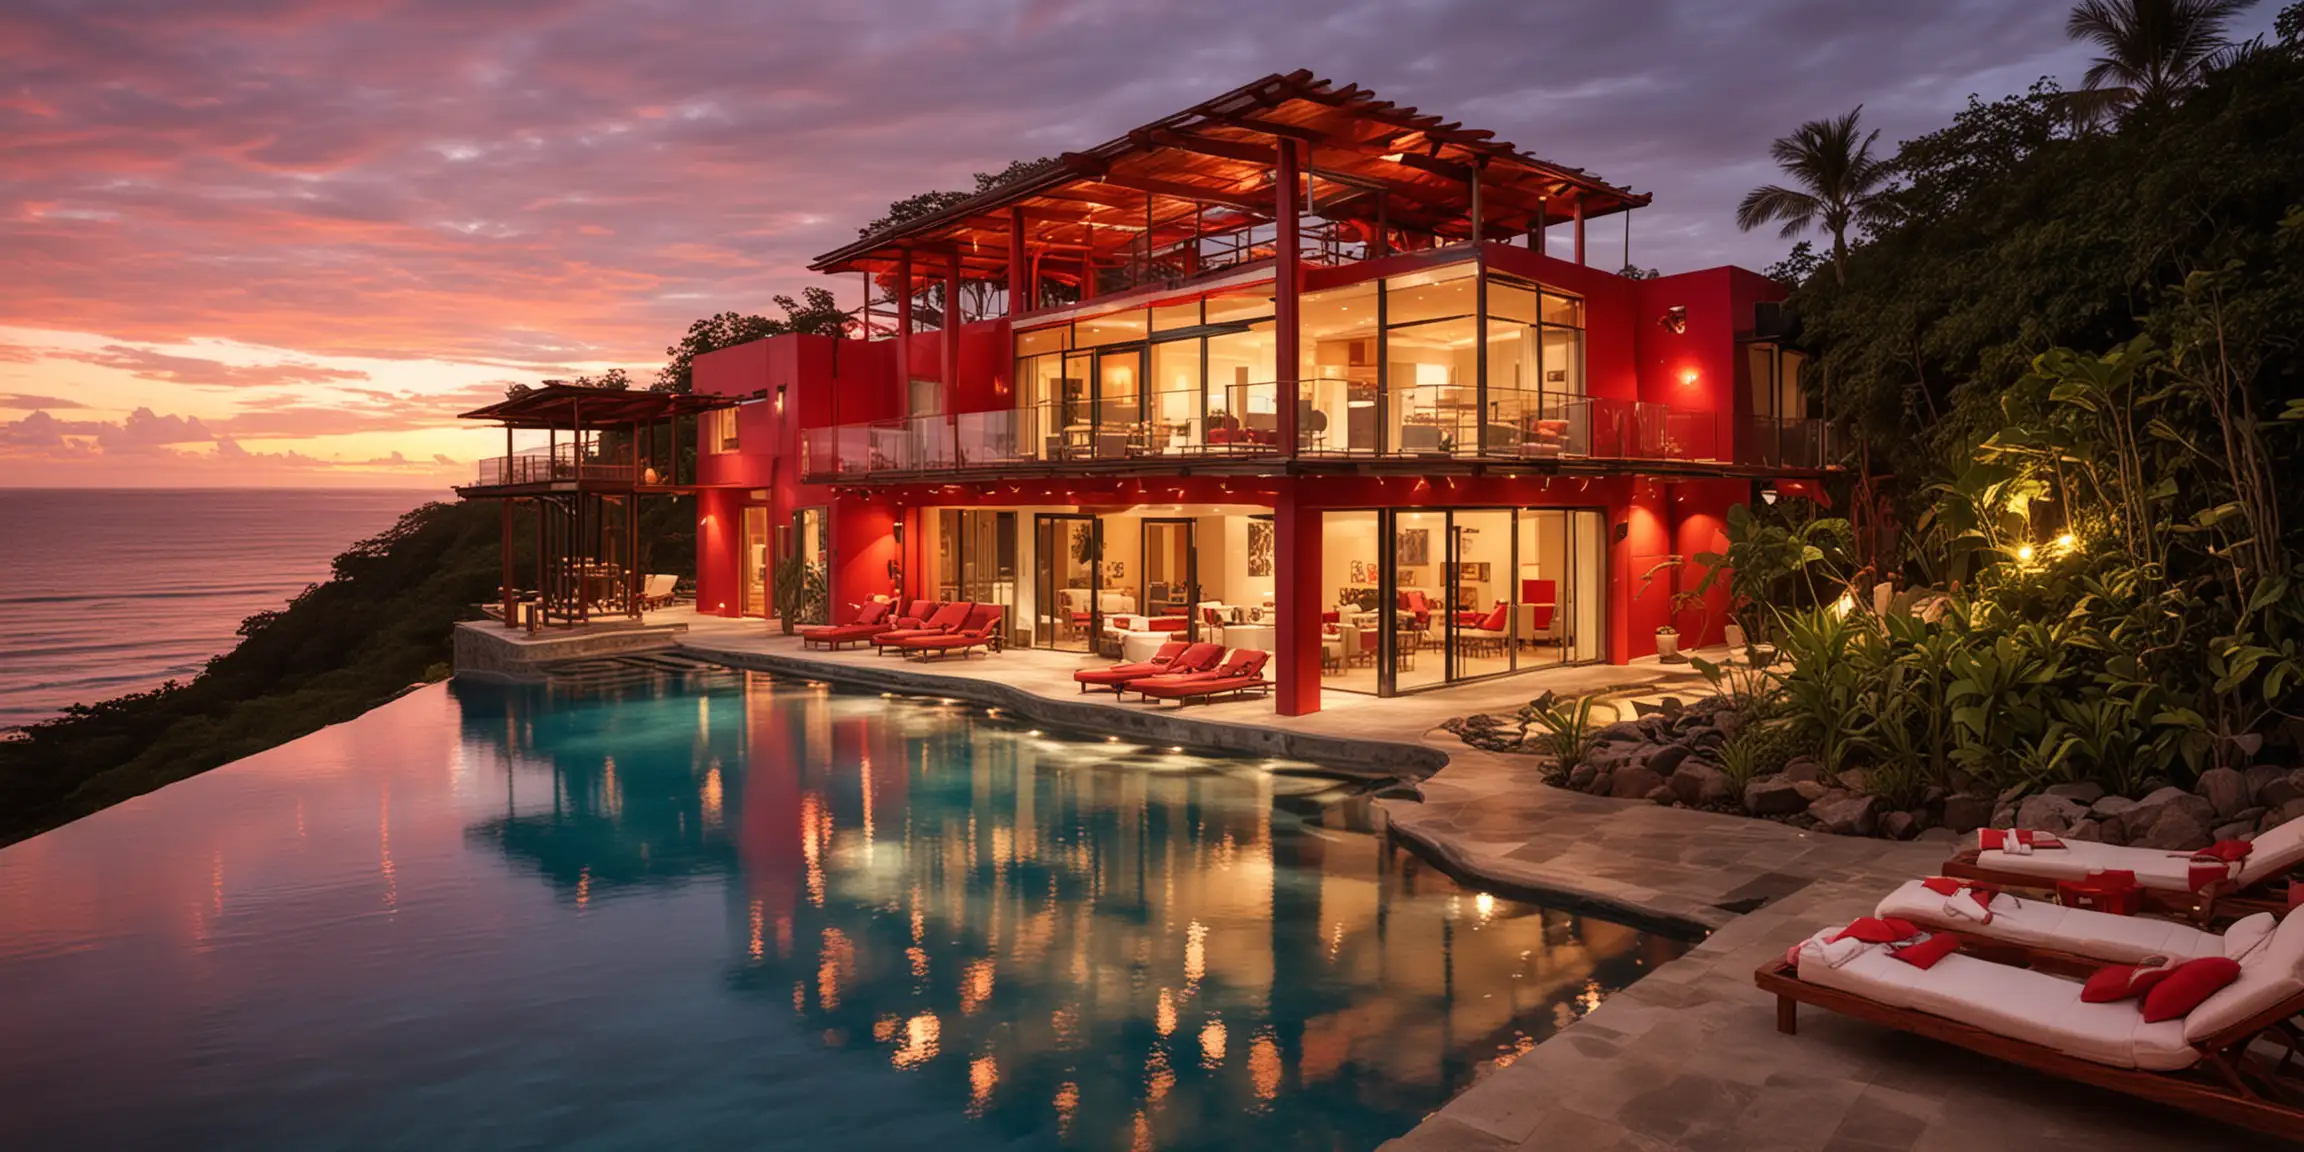 oceanfront contemporary vacation home using red colors in costa rica with outdoor living area and infinity pool at sunset with warm lighting